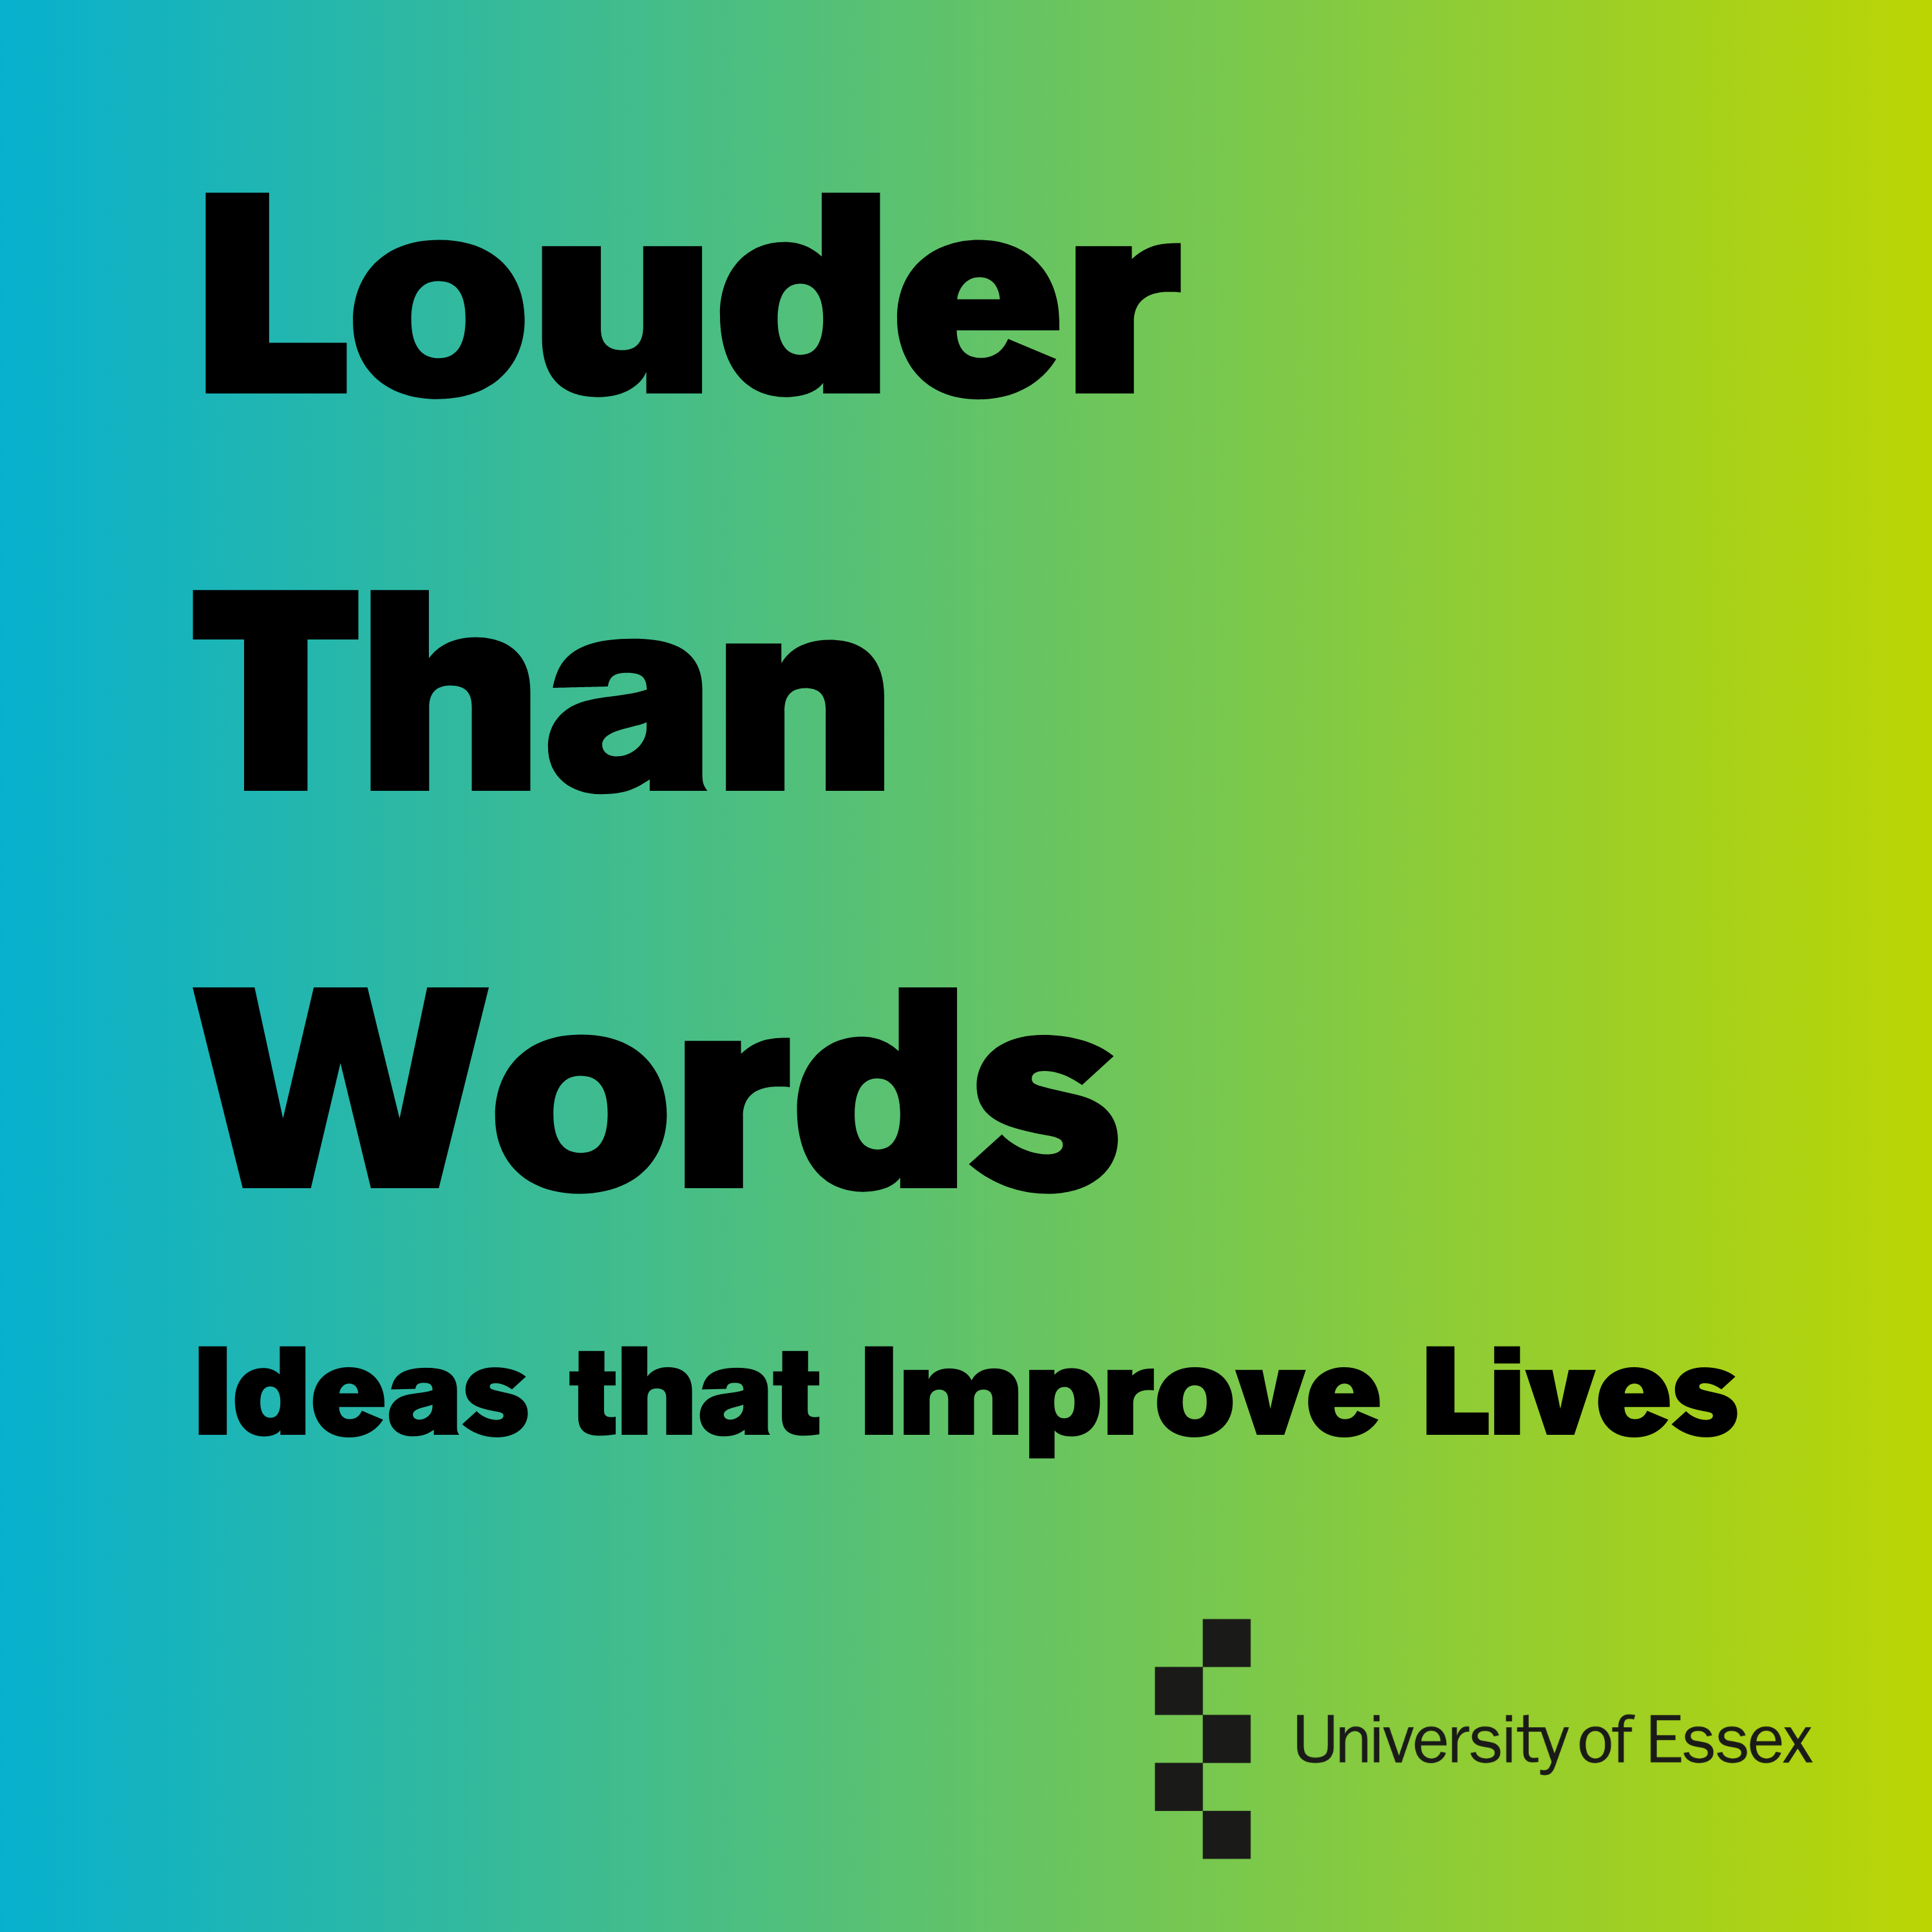 Getting Everyone Active - The Louder Than Words Podcast